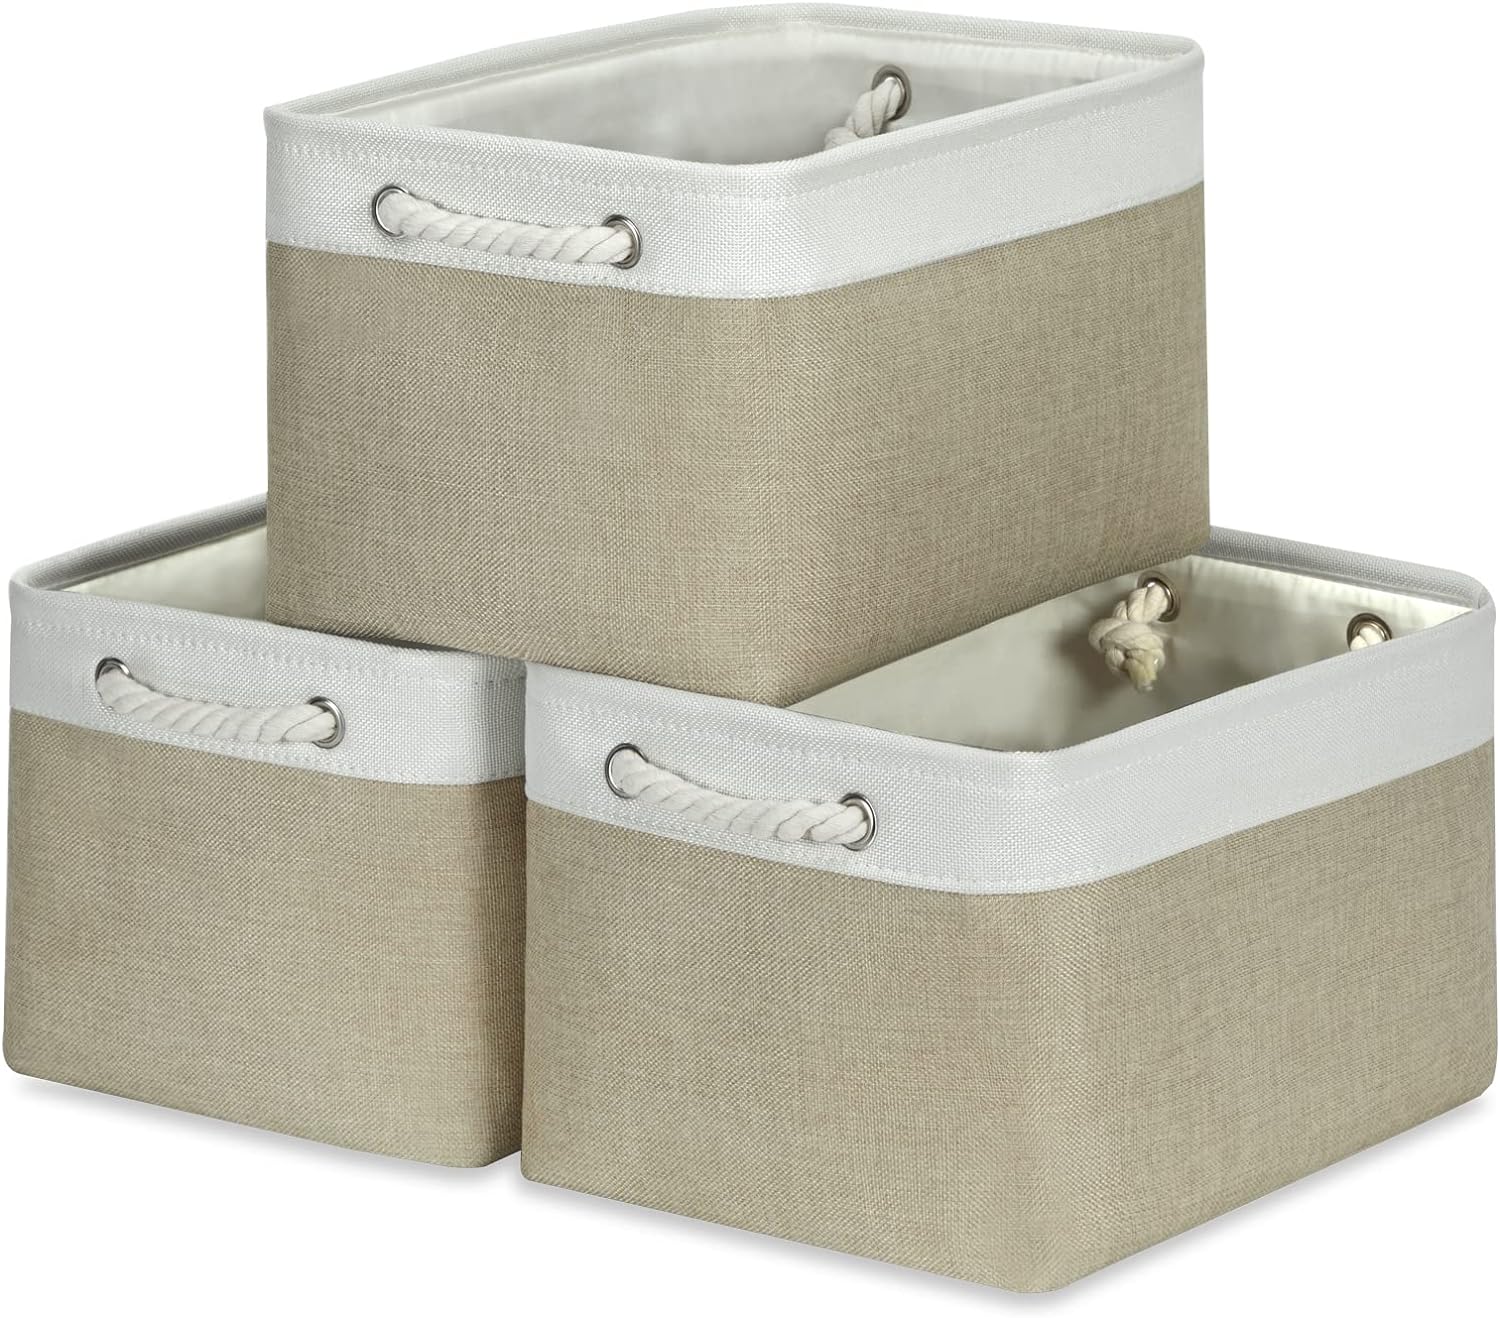 Temary Storage Baskets for Shelves, 3 Pcs Fabric Storage Bins Empty Gift Baskets for Organizing Clothes, Decorative Storage Basket with Rope Handles (White&Khaki,15Lx11Wx9.5H Inches)